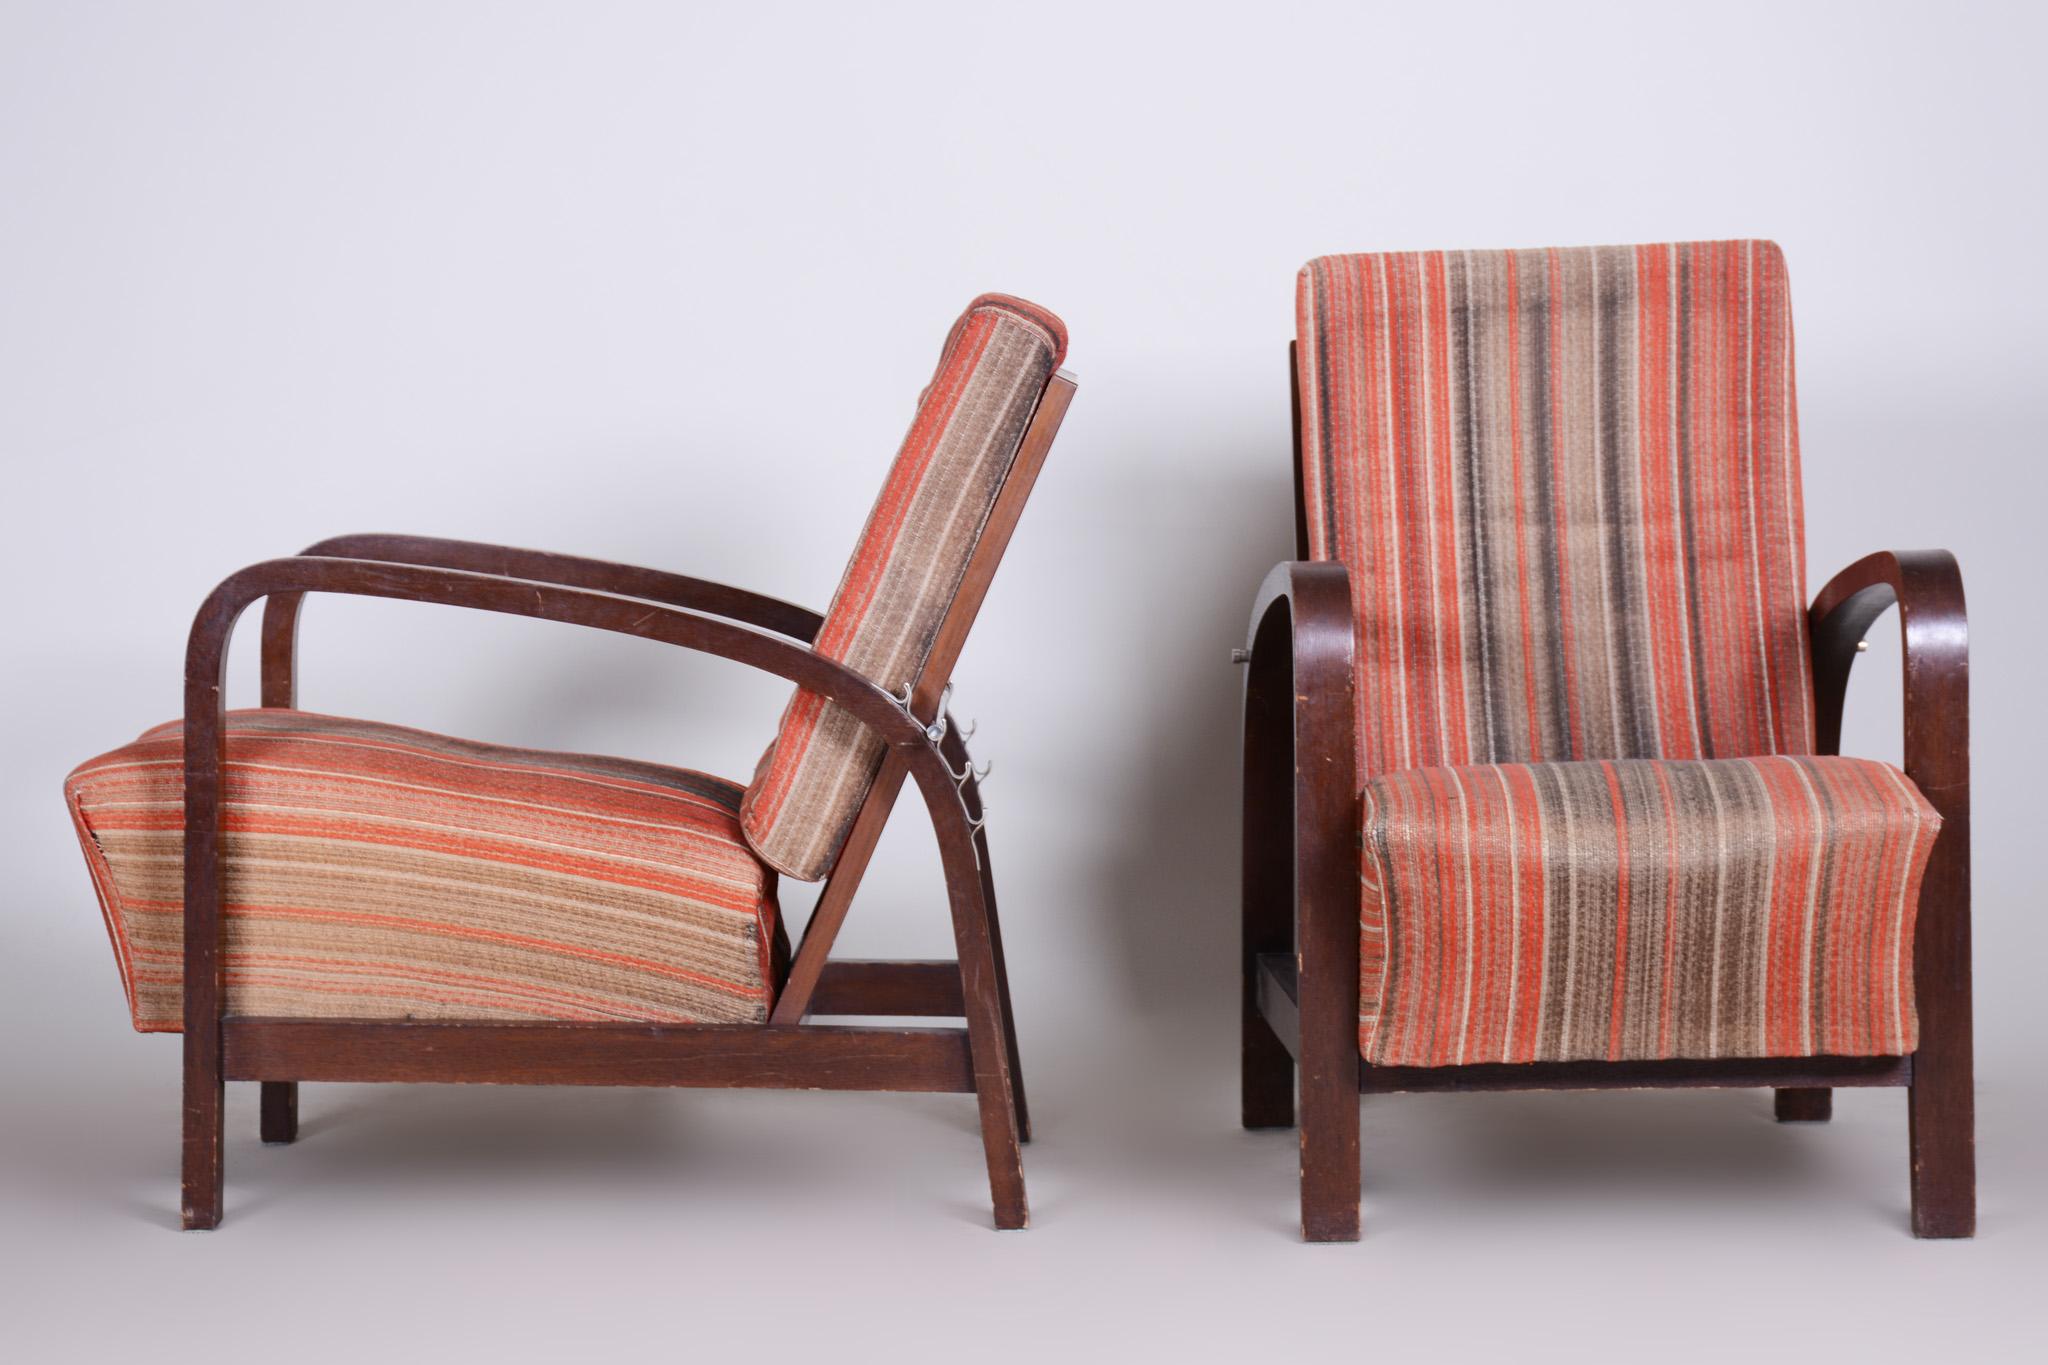 Czech Art Deco Oak Armchairs 1930s, Original Well Preserved Condition For Sale 1